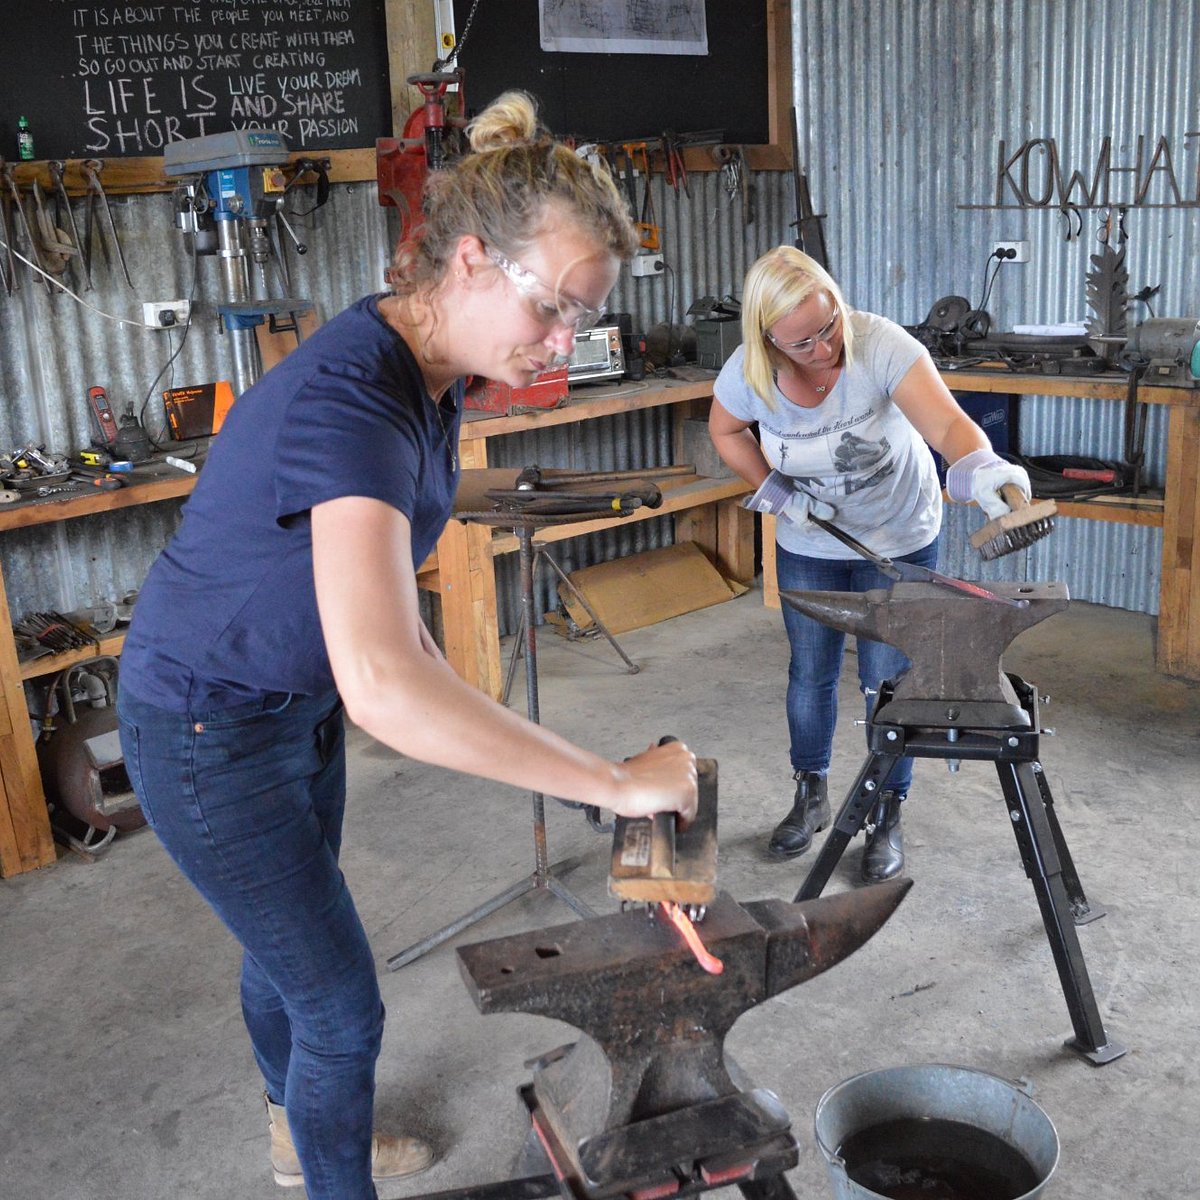 Blacksmith Tools For Knife Making, Anvil, Forging - NORTH RIVER OUTDOORS